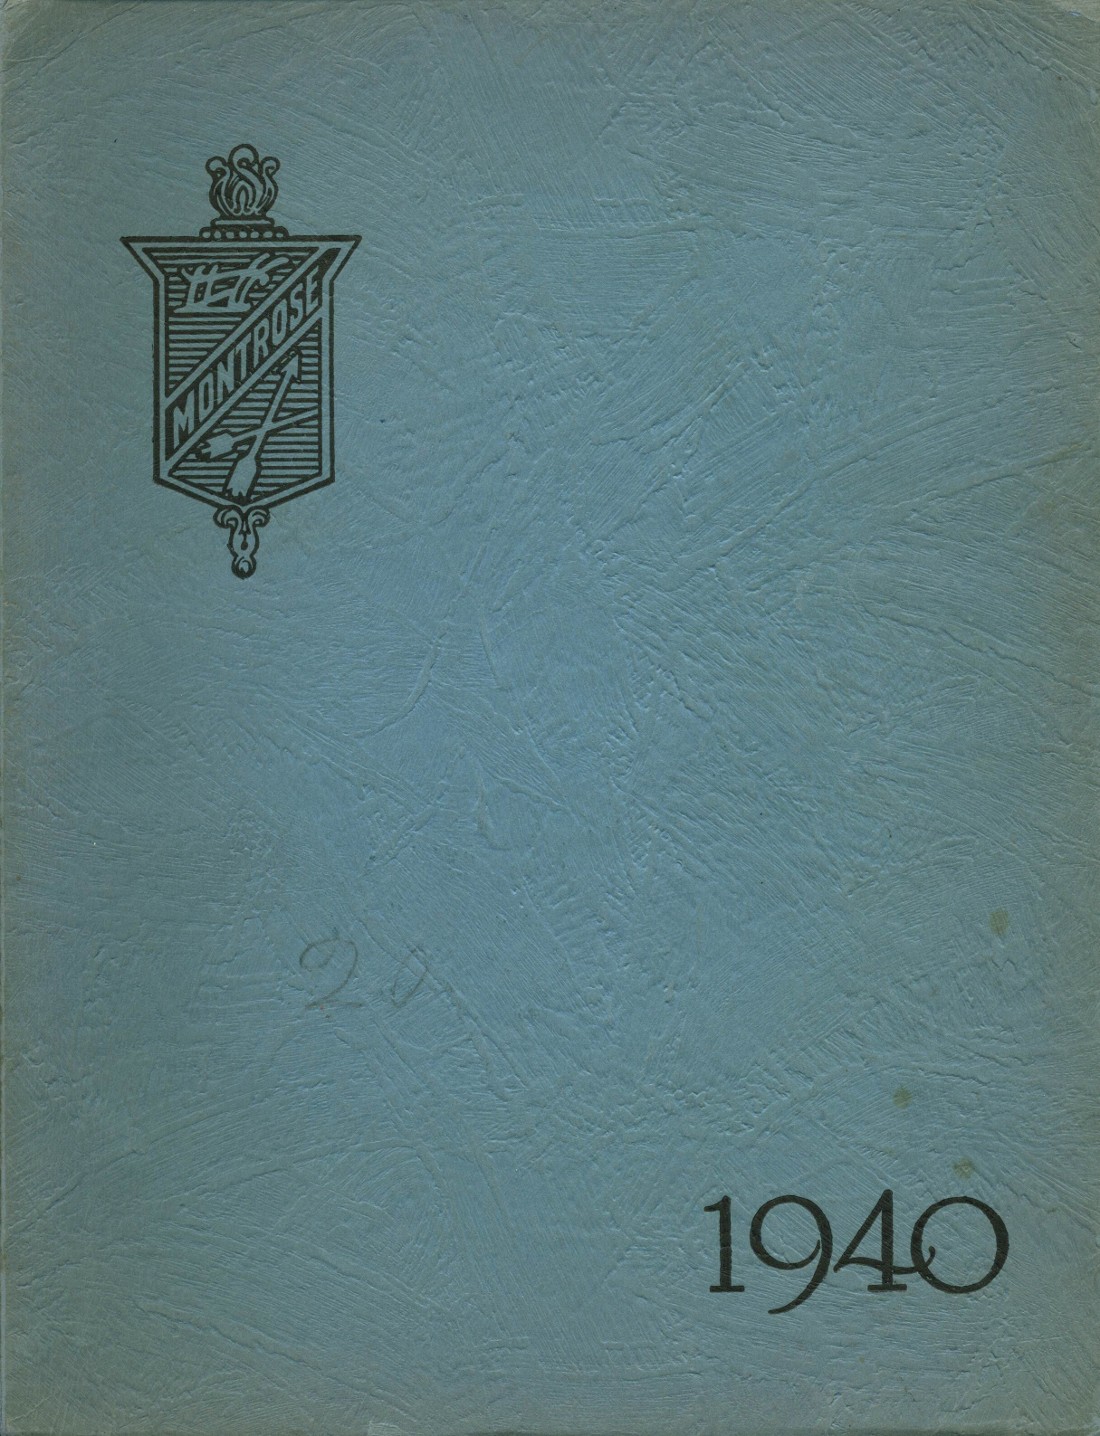 1940 yearbook from Montrose High School from Montrose, Pennsylvania